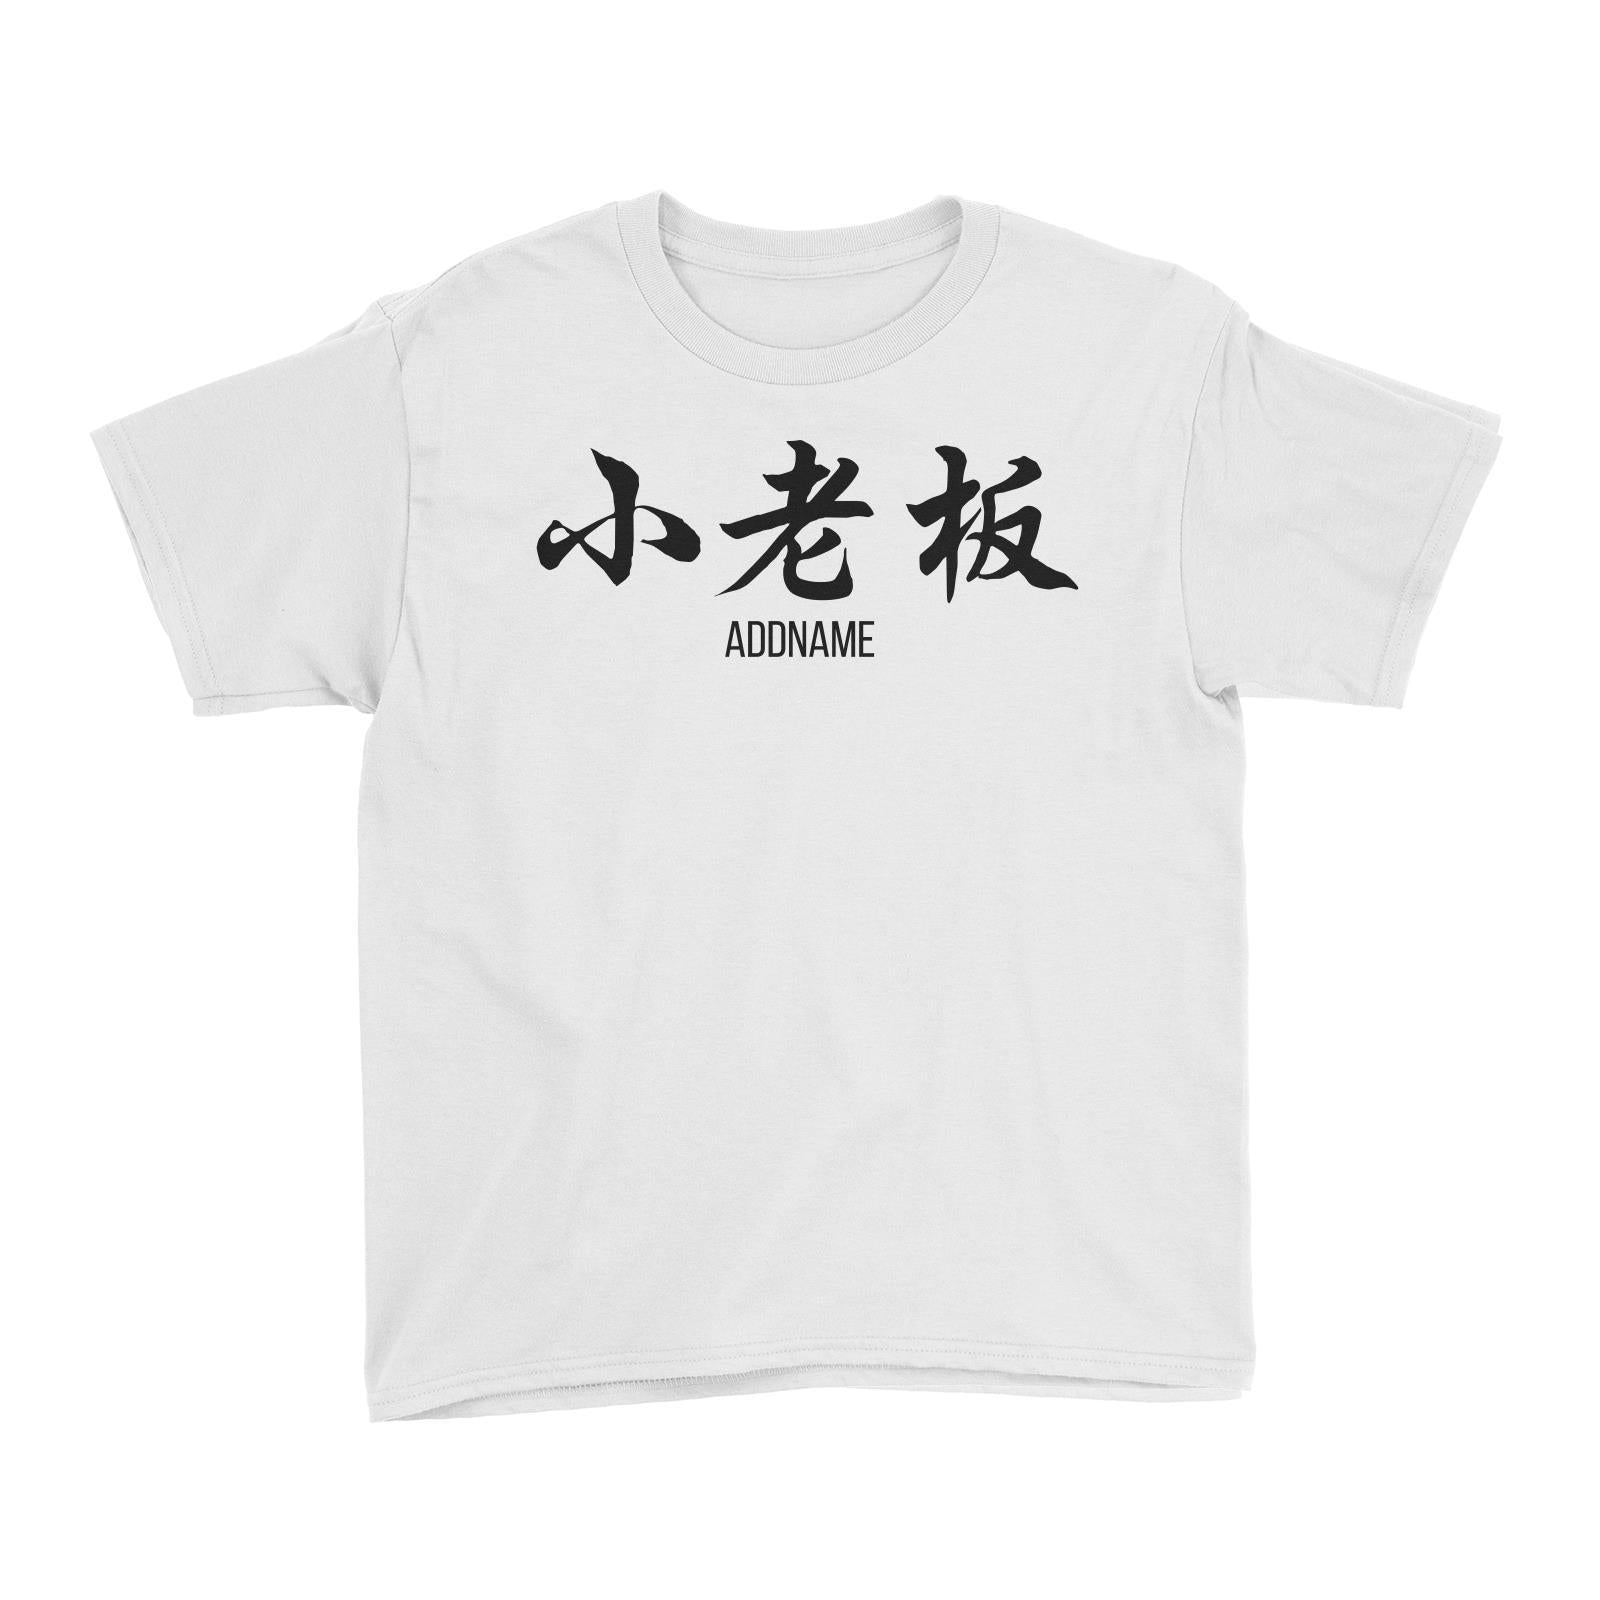 Small Boss in Chinese Calligraphy Kid's T-Shirt